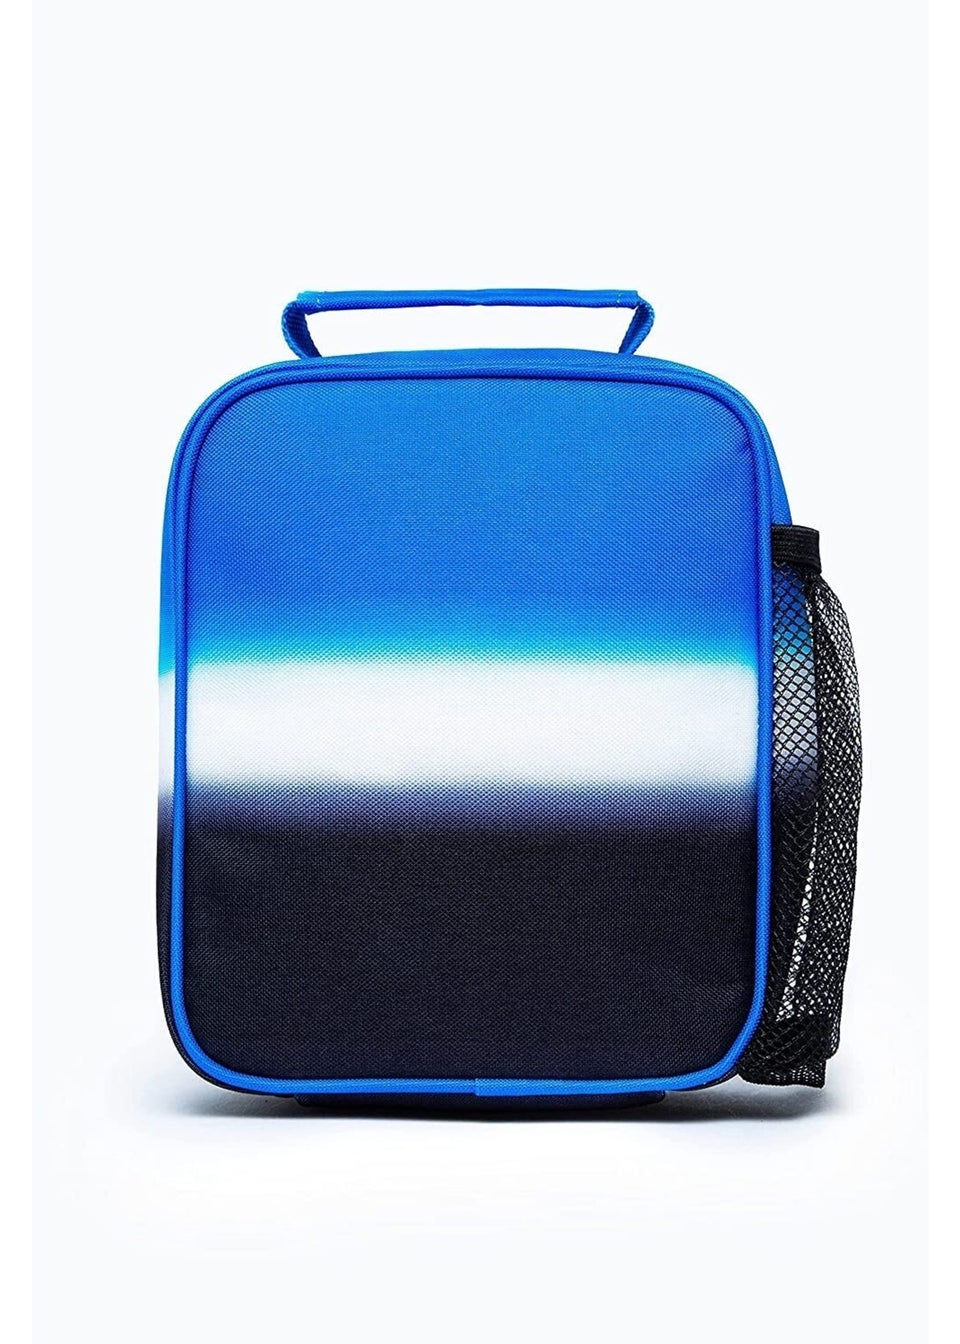 Hype Blue Fade Lunch Bag